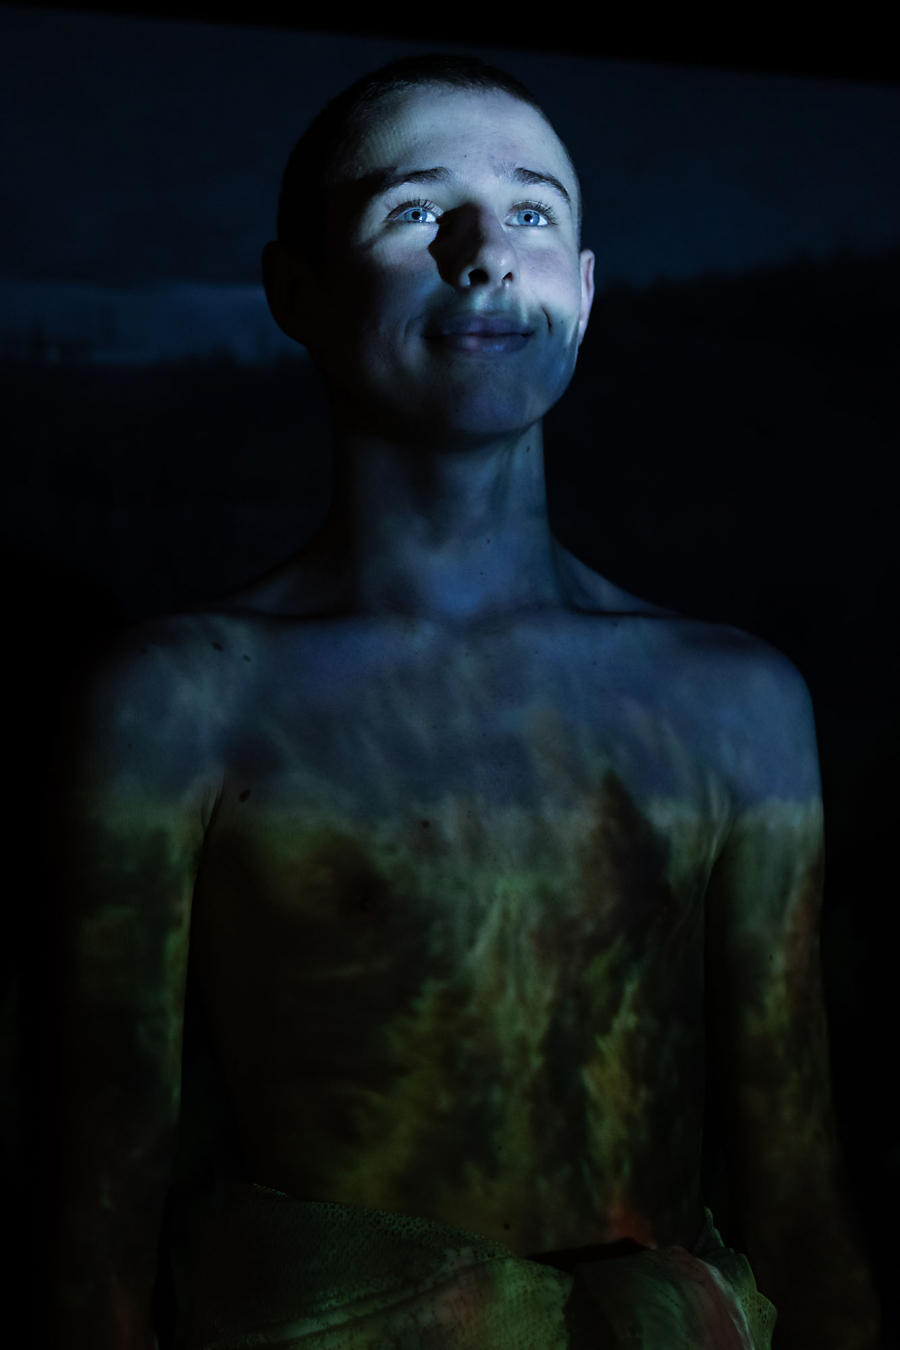 Young boy with photos of forests and nature projected on his body - the boy looks happy